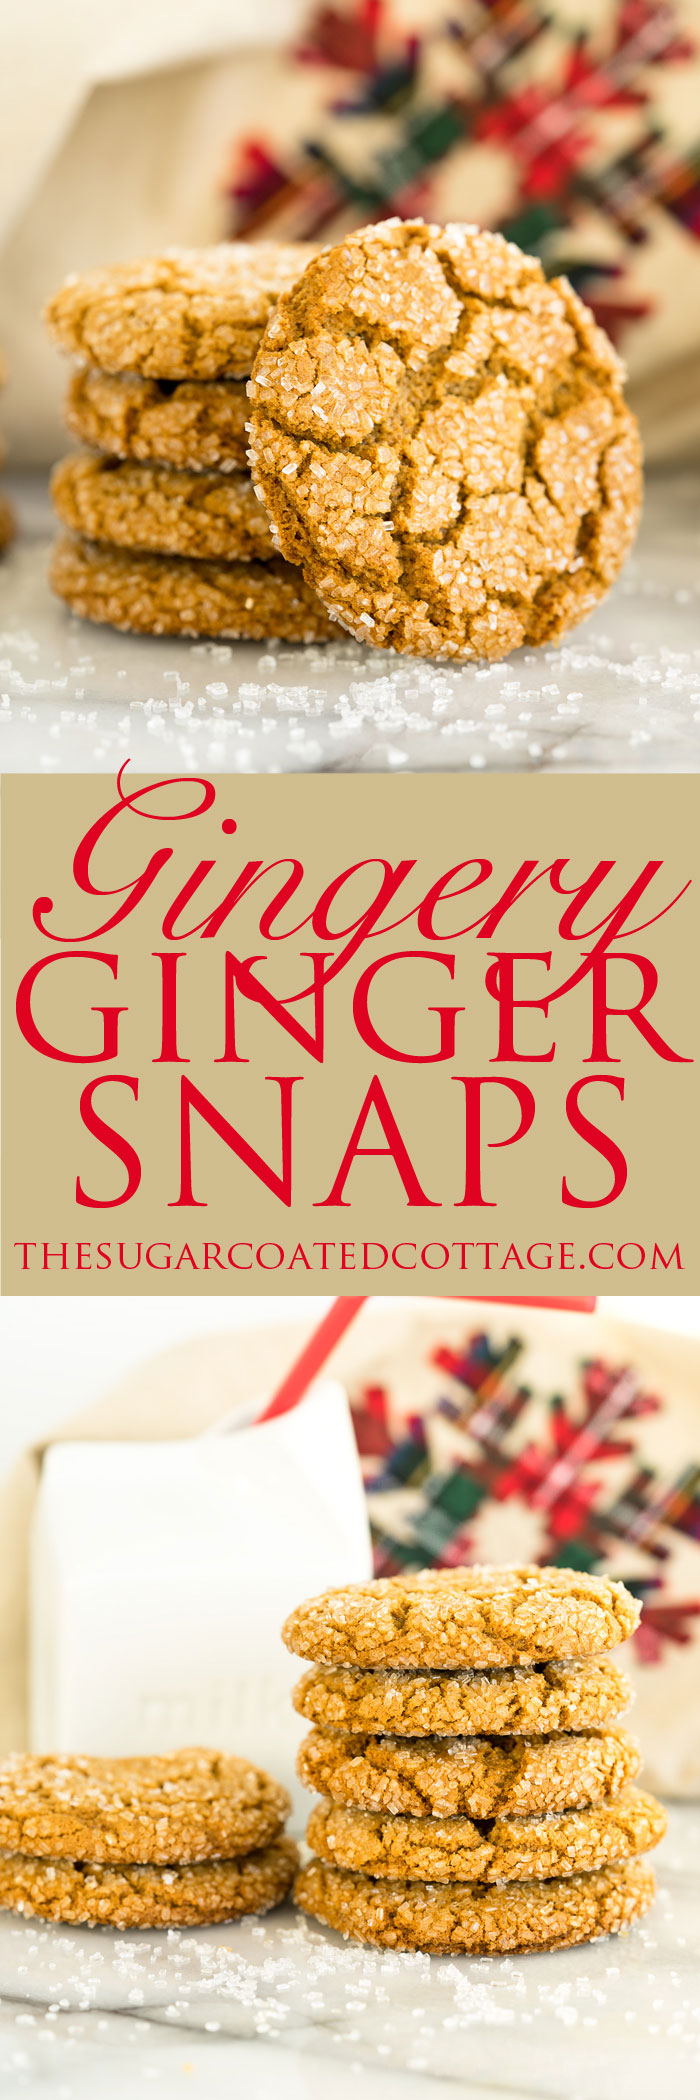 Gingery Ginger Snap Cookie recipe. Full of ginger, crinkled to perfection and coated in sanding sugar. If ever there was a holiday cookie this is it! | thesugarcoatedcottage.com